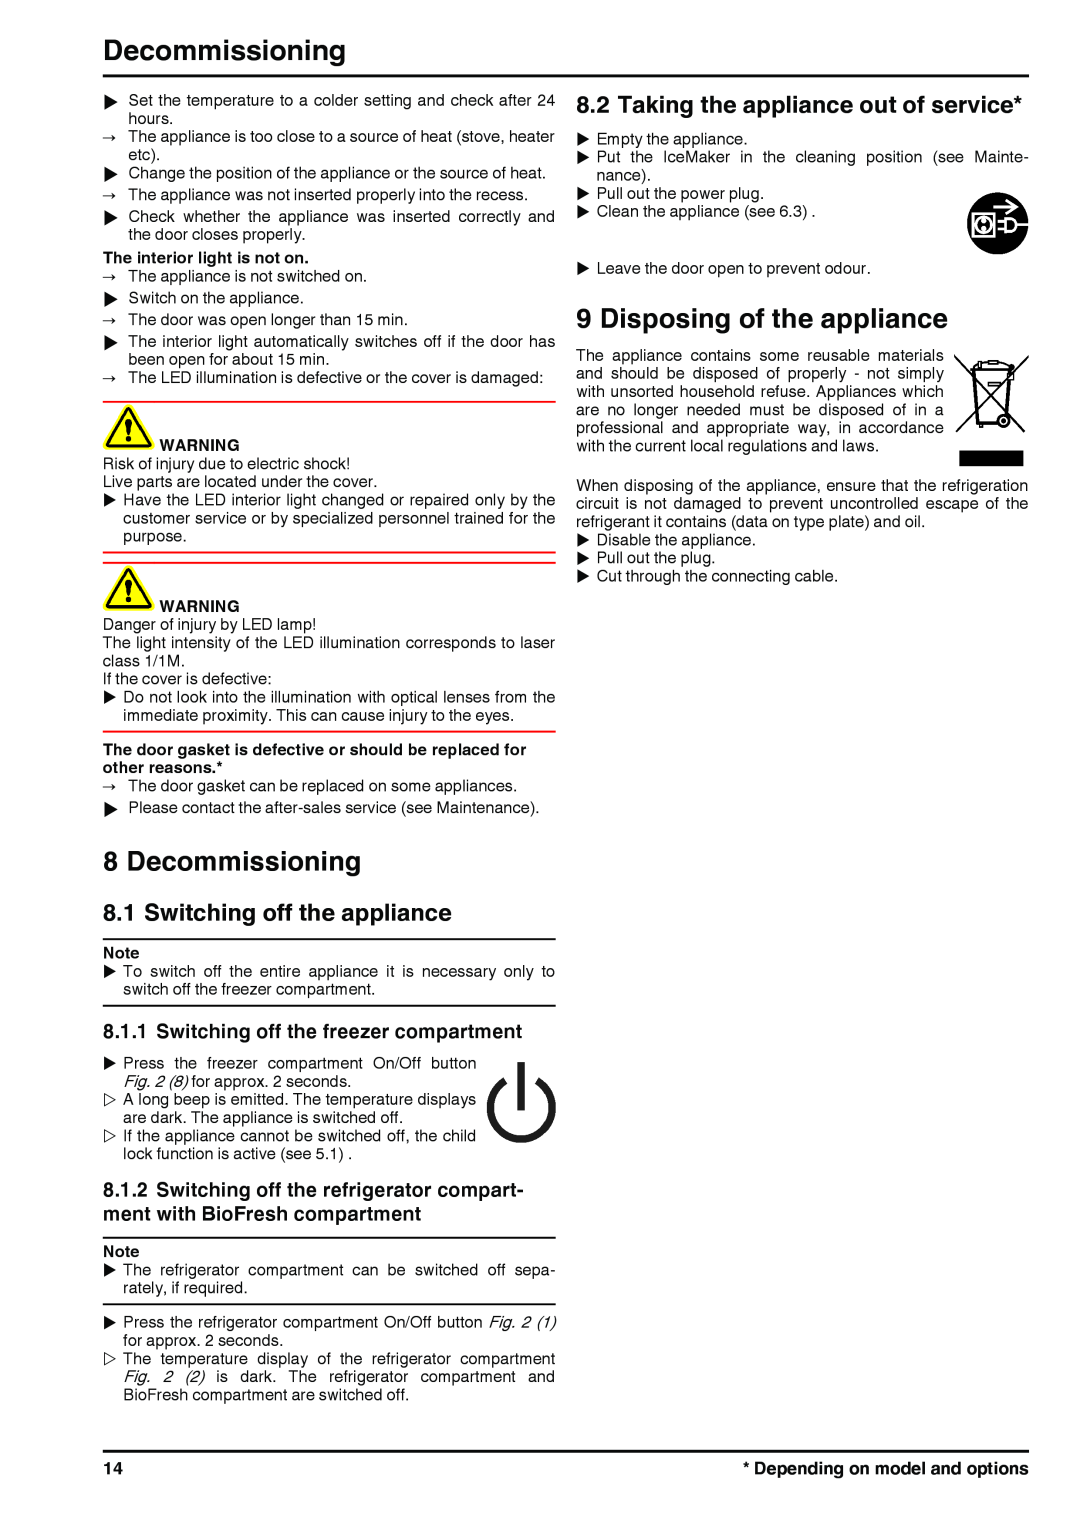 Liebherr 131113 7085462 - 01 Decommissioning, Disposing of the appliance, Switching off the appliance 